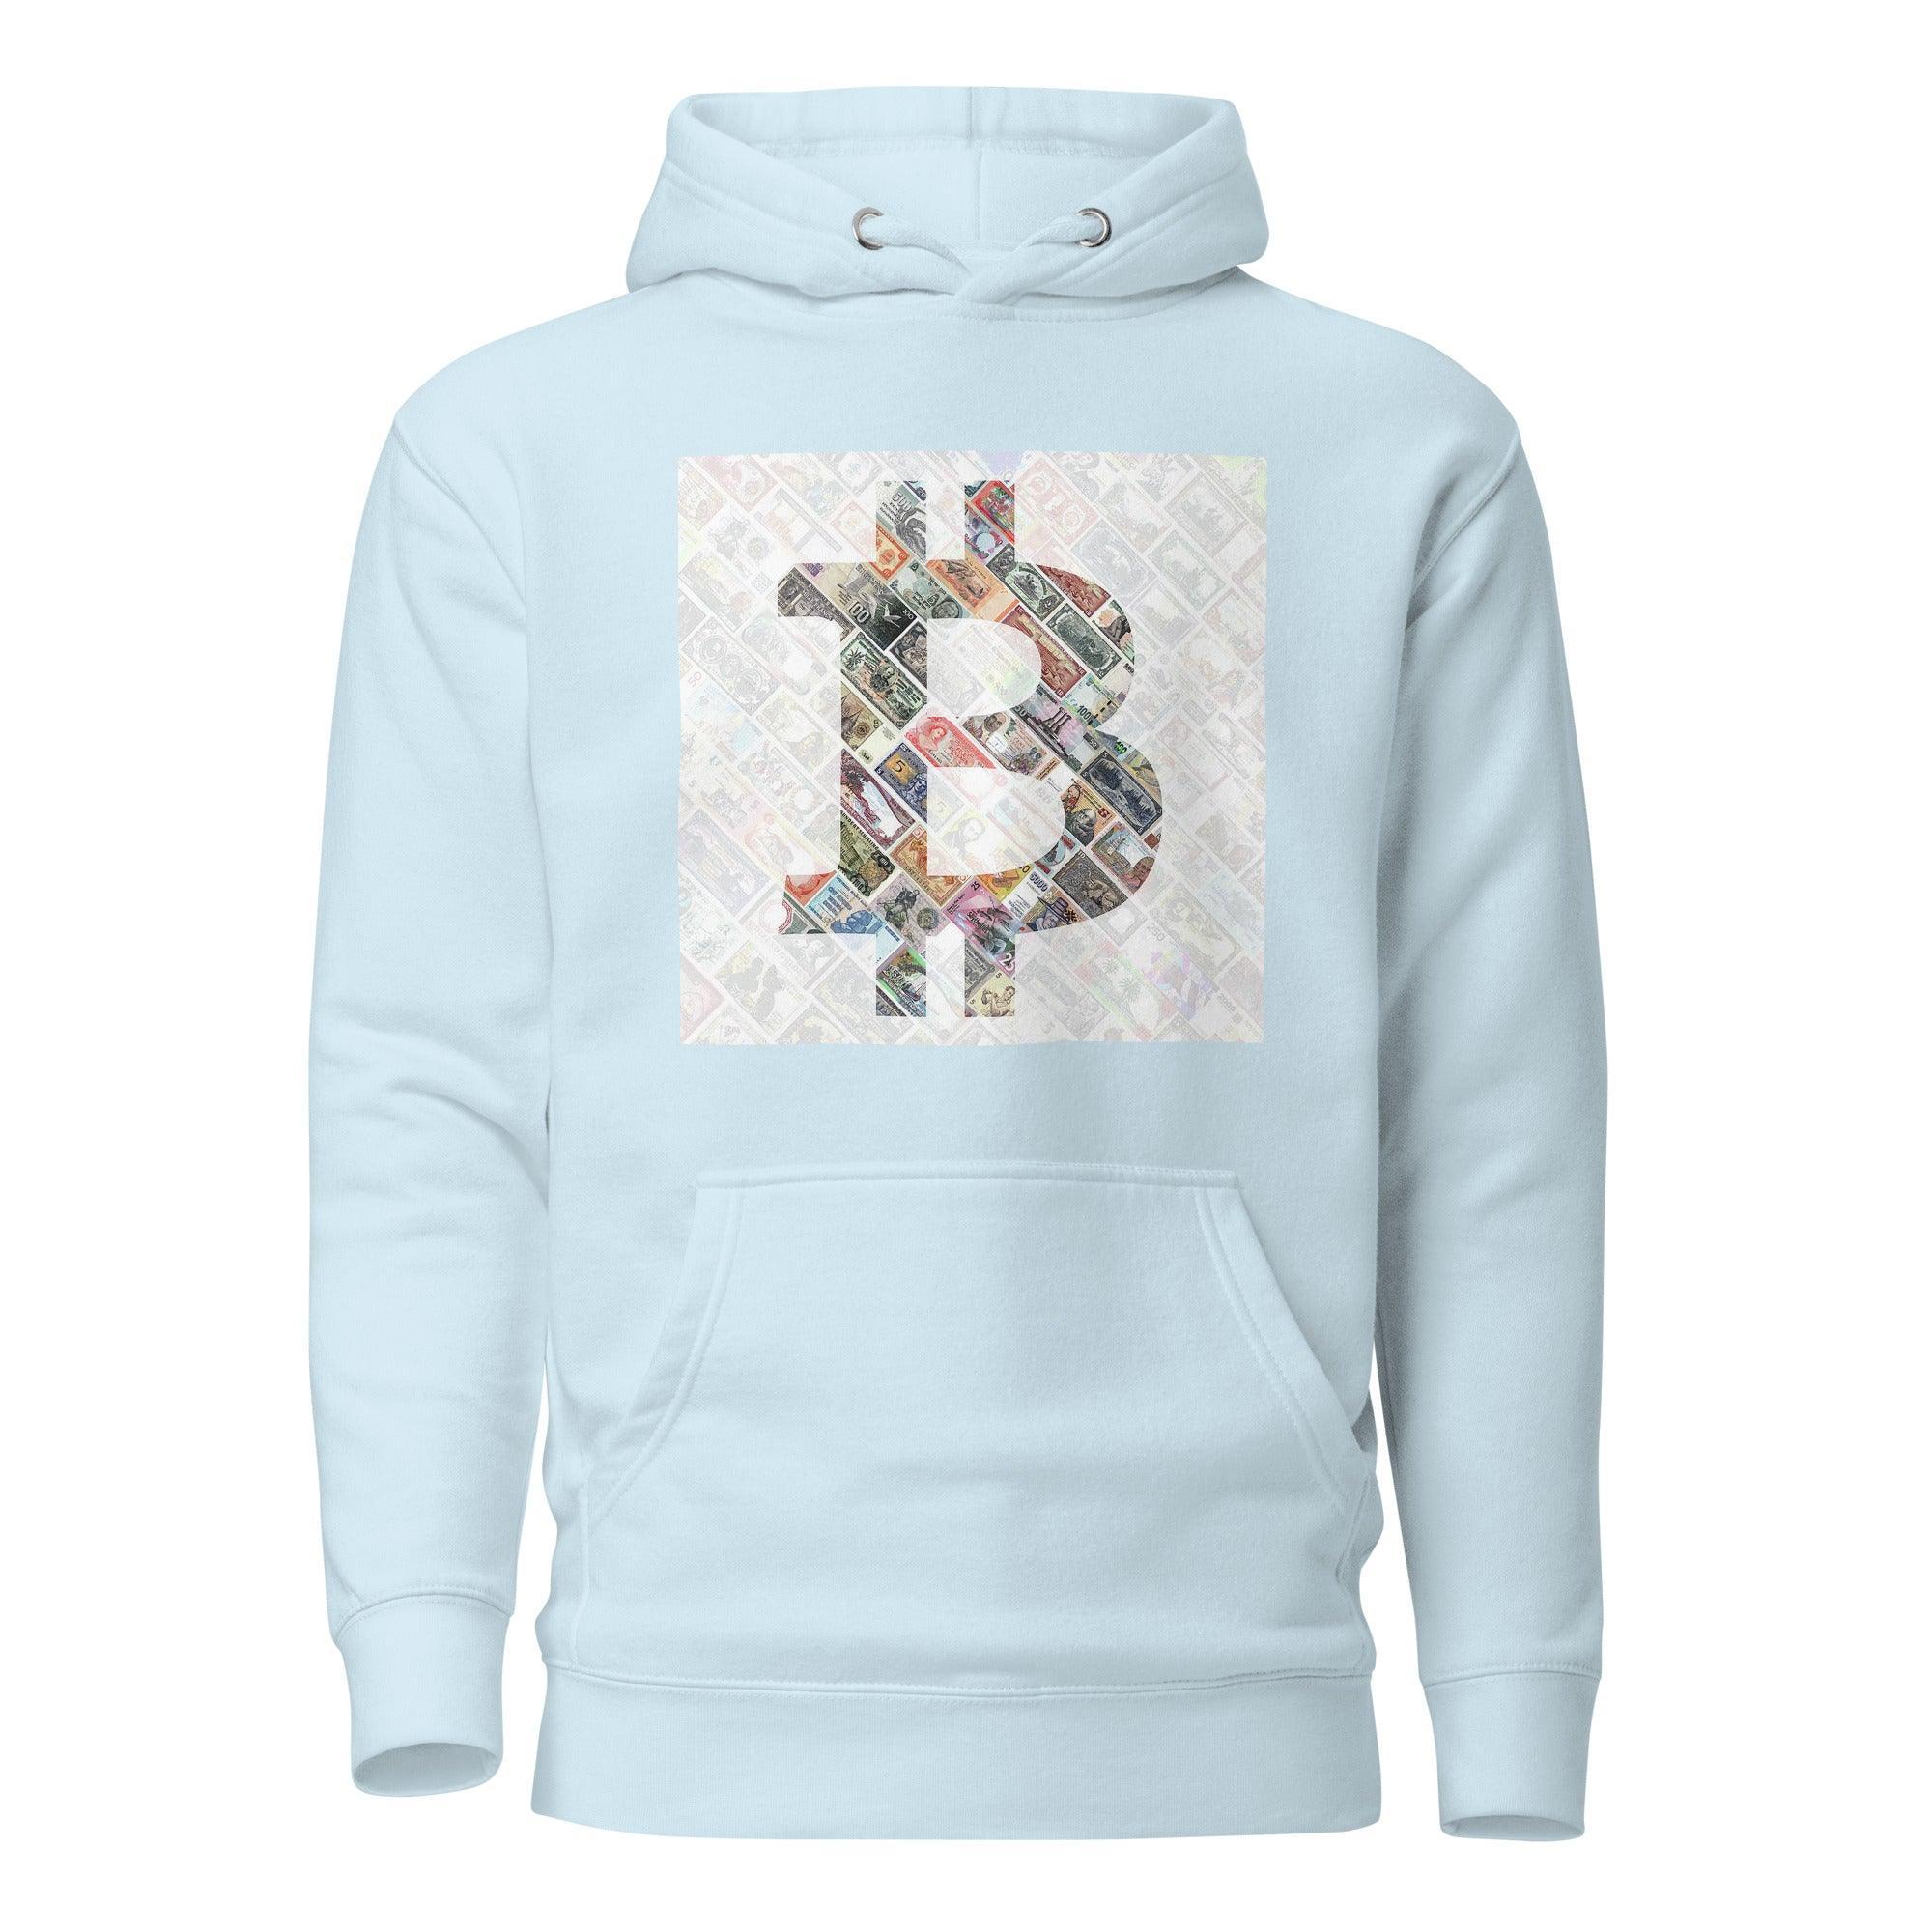 Bitcoin Mosiac Pullover Hoodie - InvestmenTees